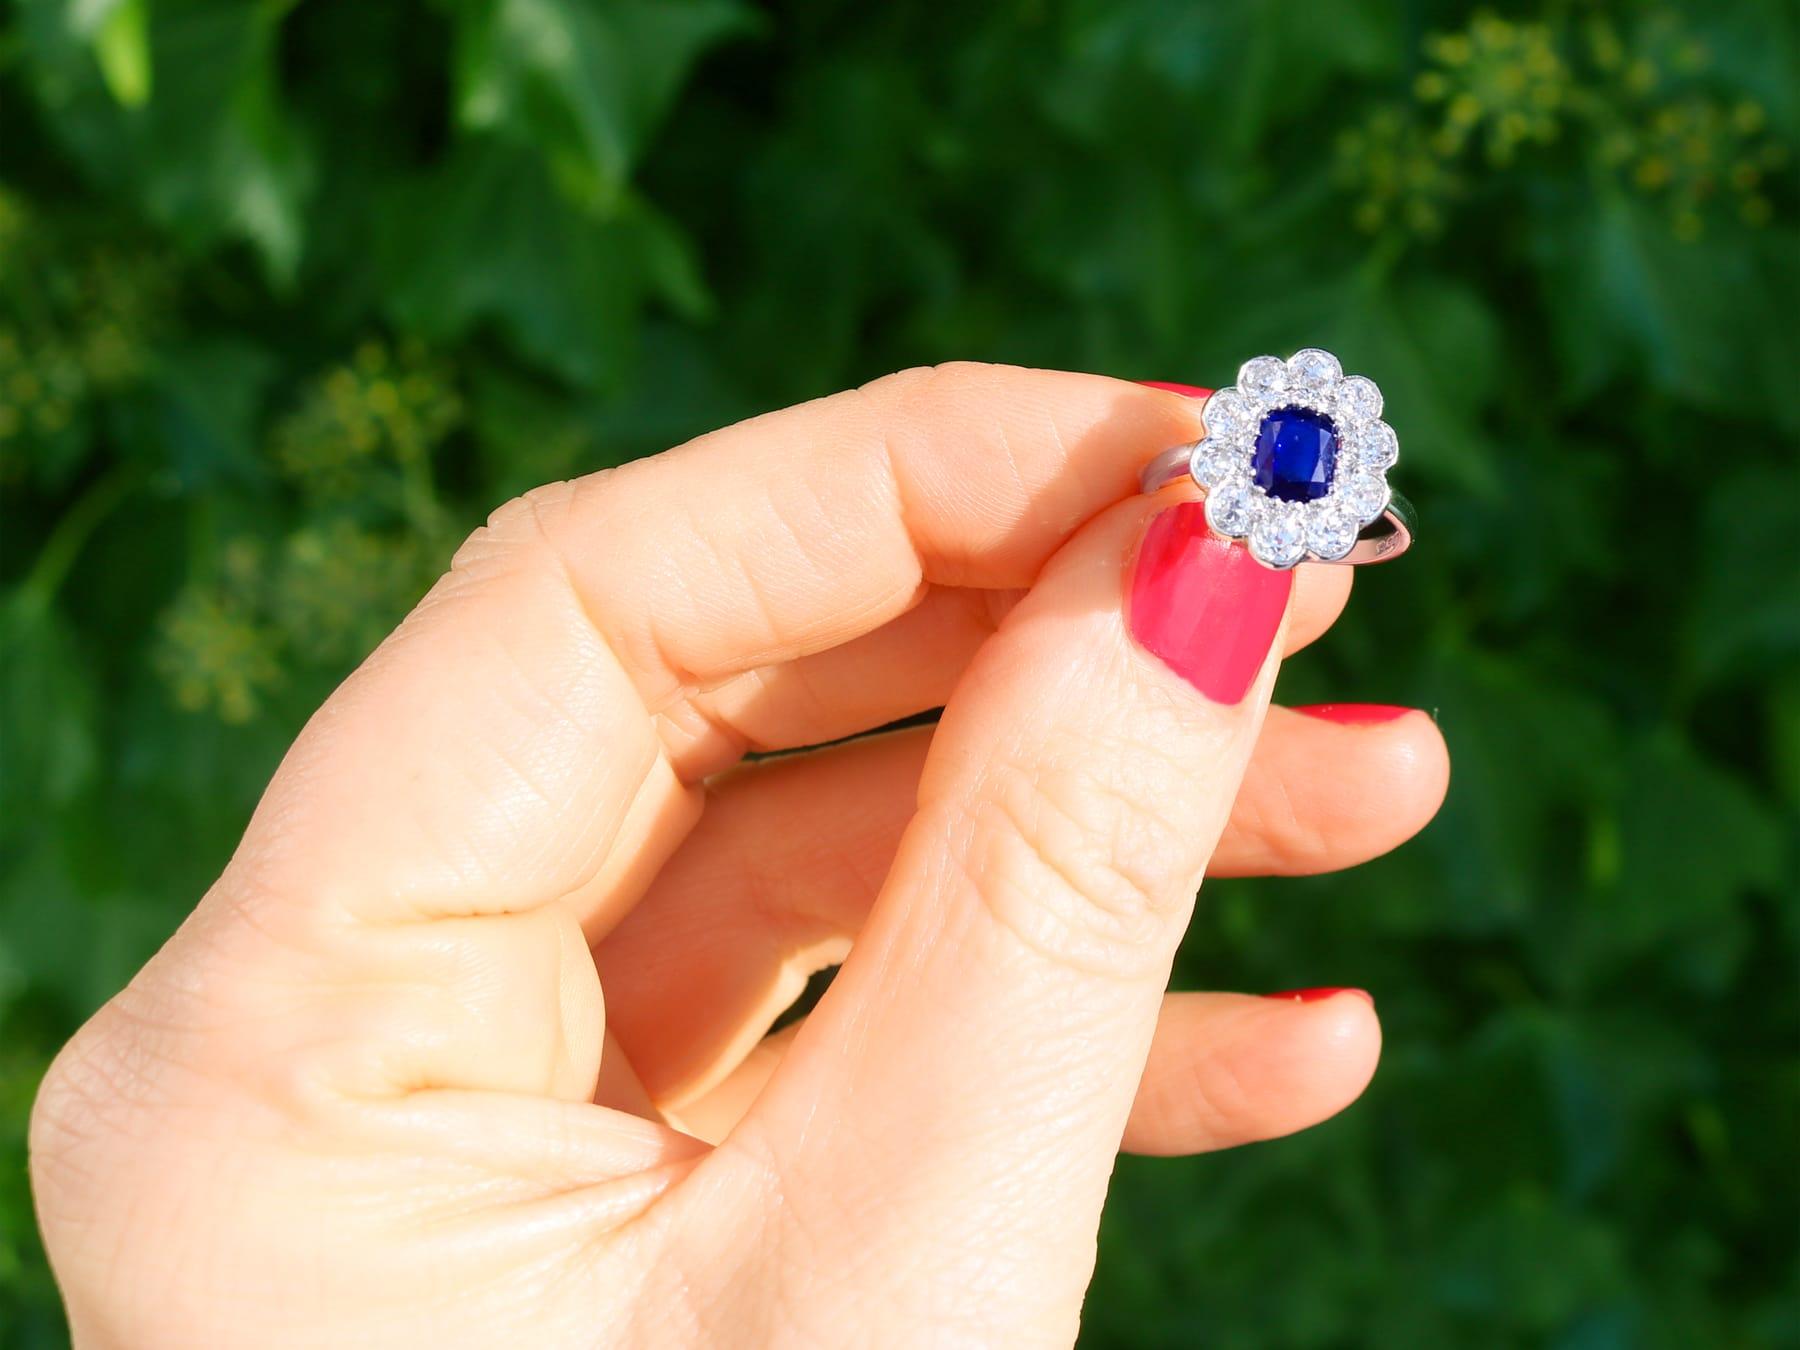 A fine and impressive antique 1920s 1.07 carat sapphire and 1.54 carat diamond, platinum cluster style dress ring; part of our diverse antique jewelry and estate jewelry collections.

This fine and impressive antique sapphire and diamond ring has